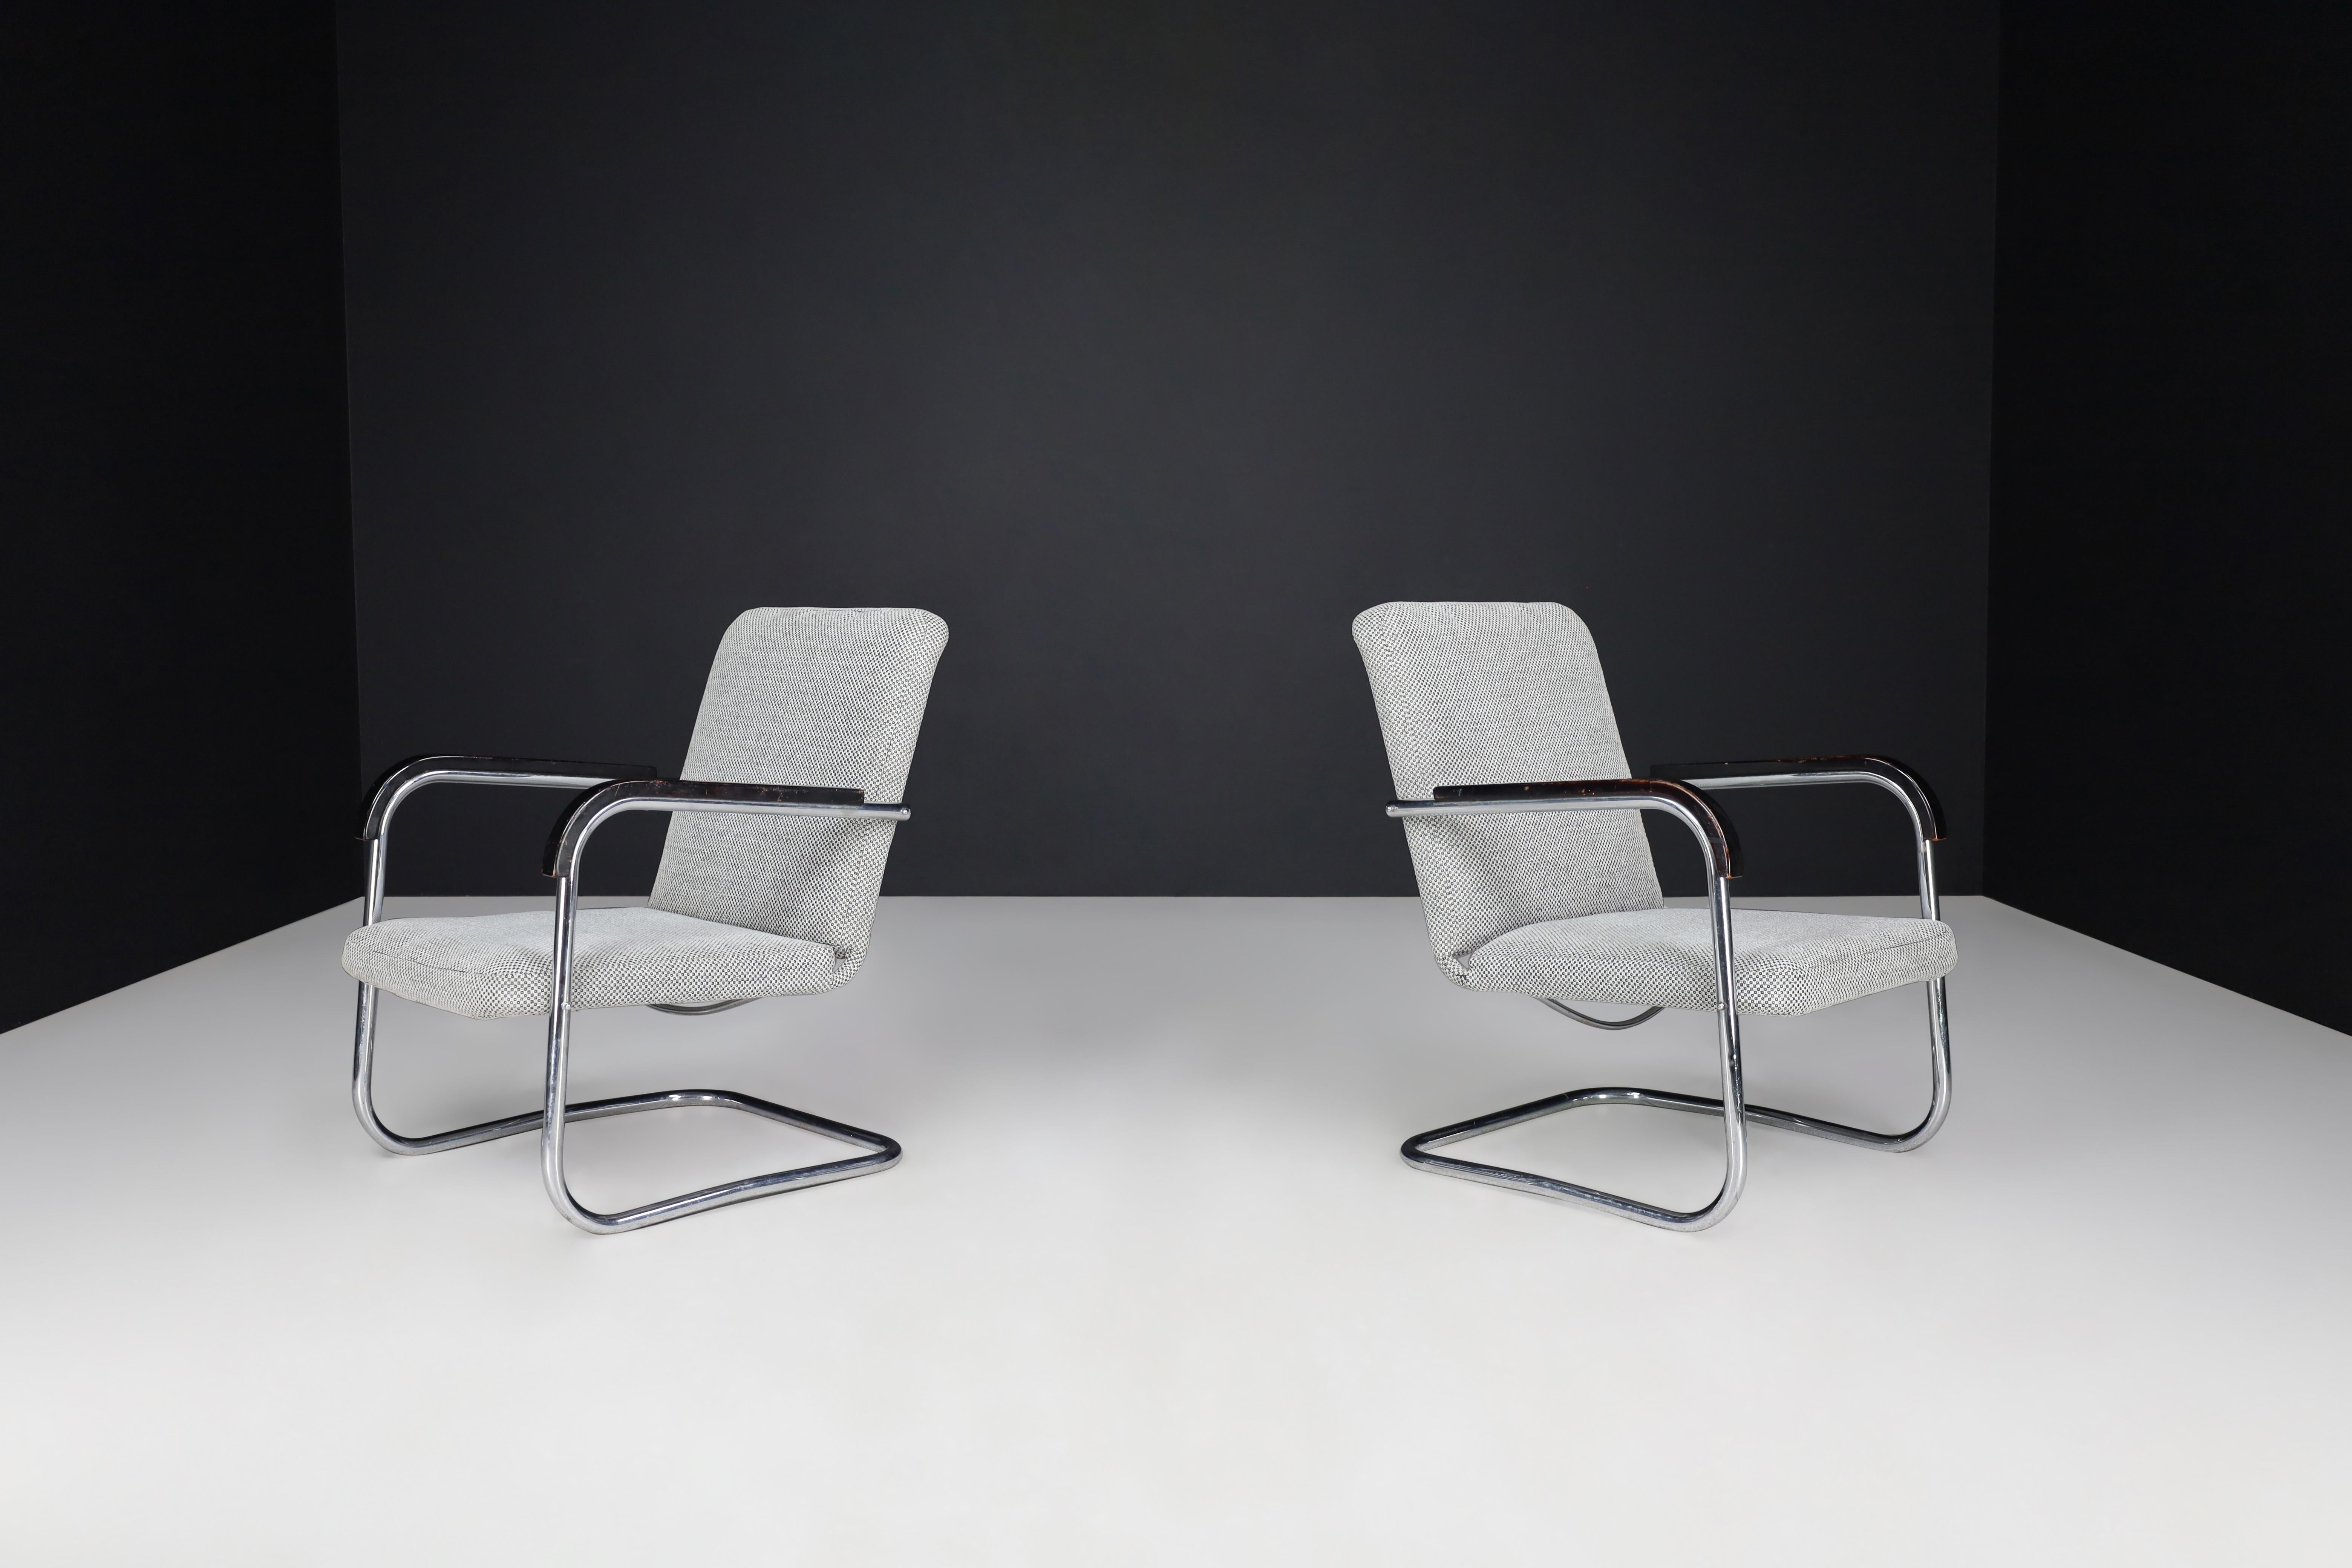 German Thonet Chrome Steel Cantilever Armchairs 1930s Midcentury Bauhaus period. For Sale